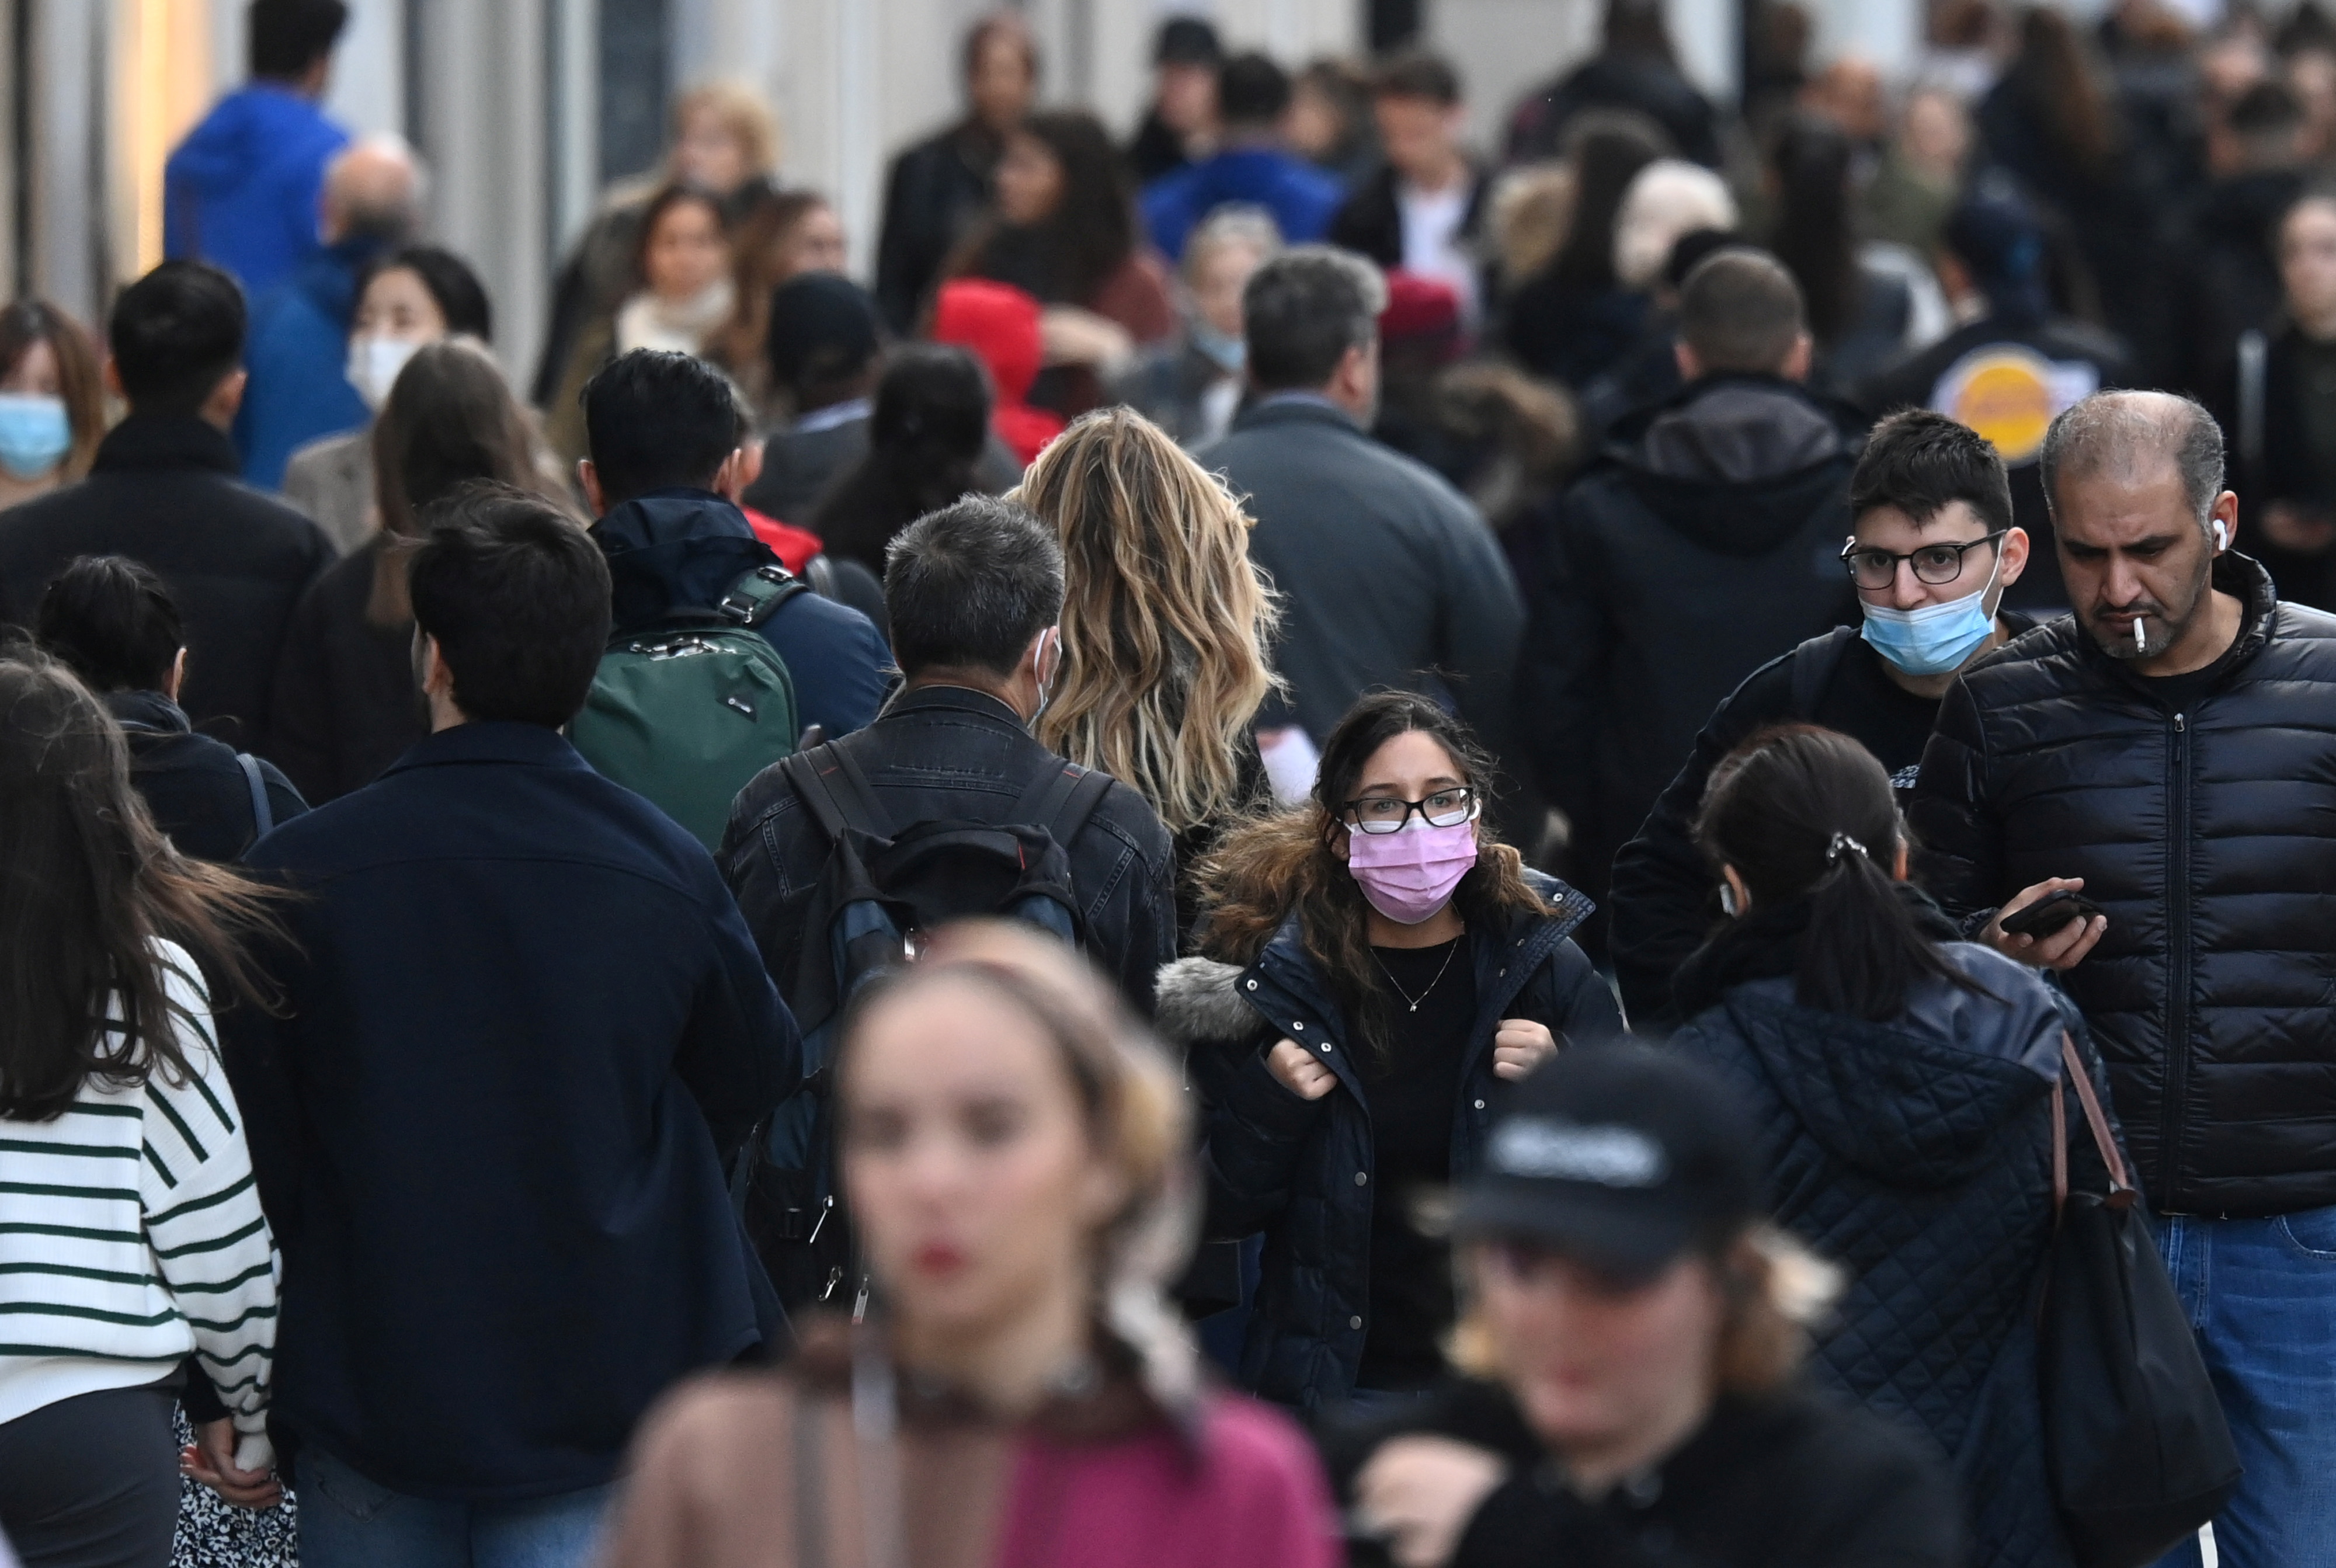 Shoppers, some wearing masks, walk along Oxford Street amidst the spread of the coronavirus disease (COVID-19) pandemic, in London, Britain, October 20, 2021. REUTERS/Toby Melville